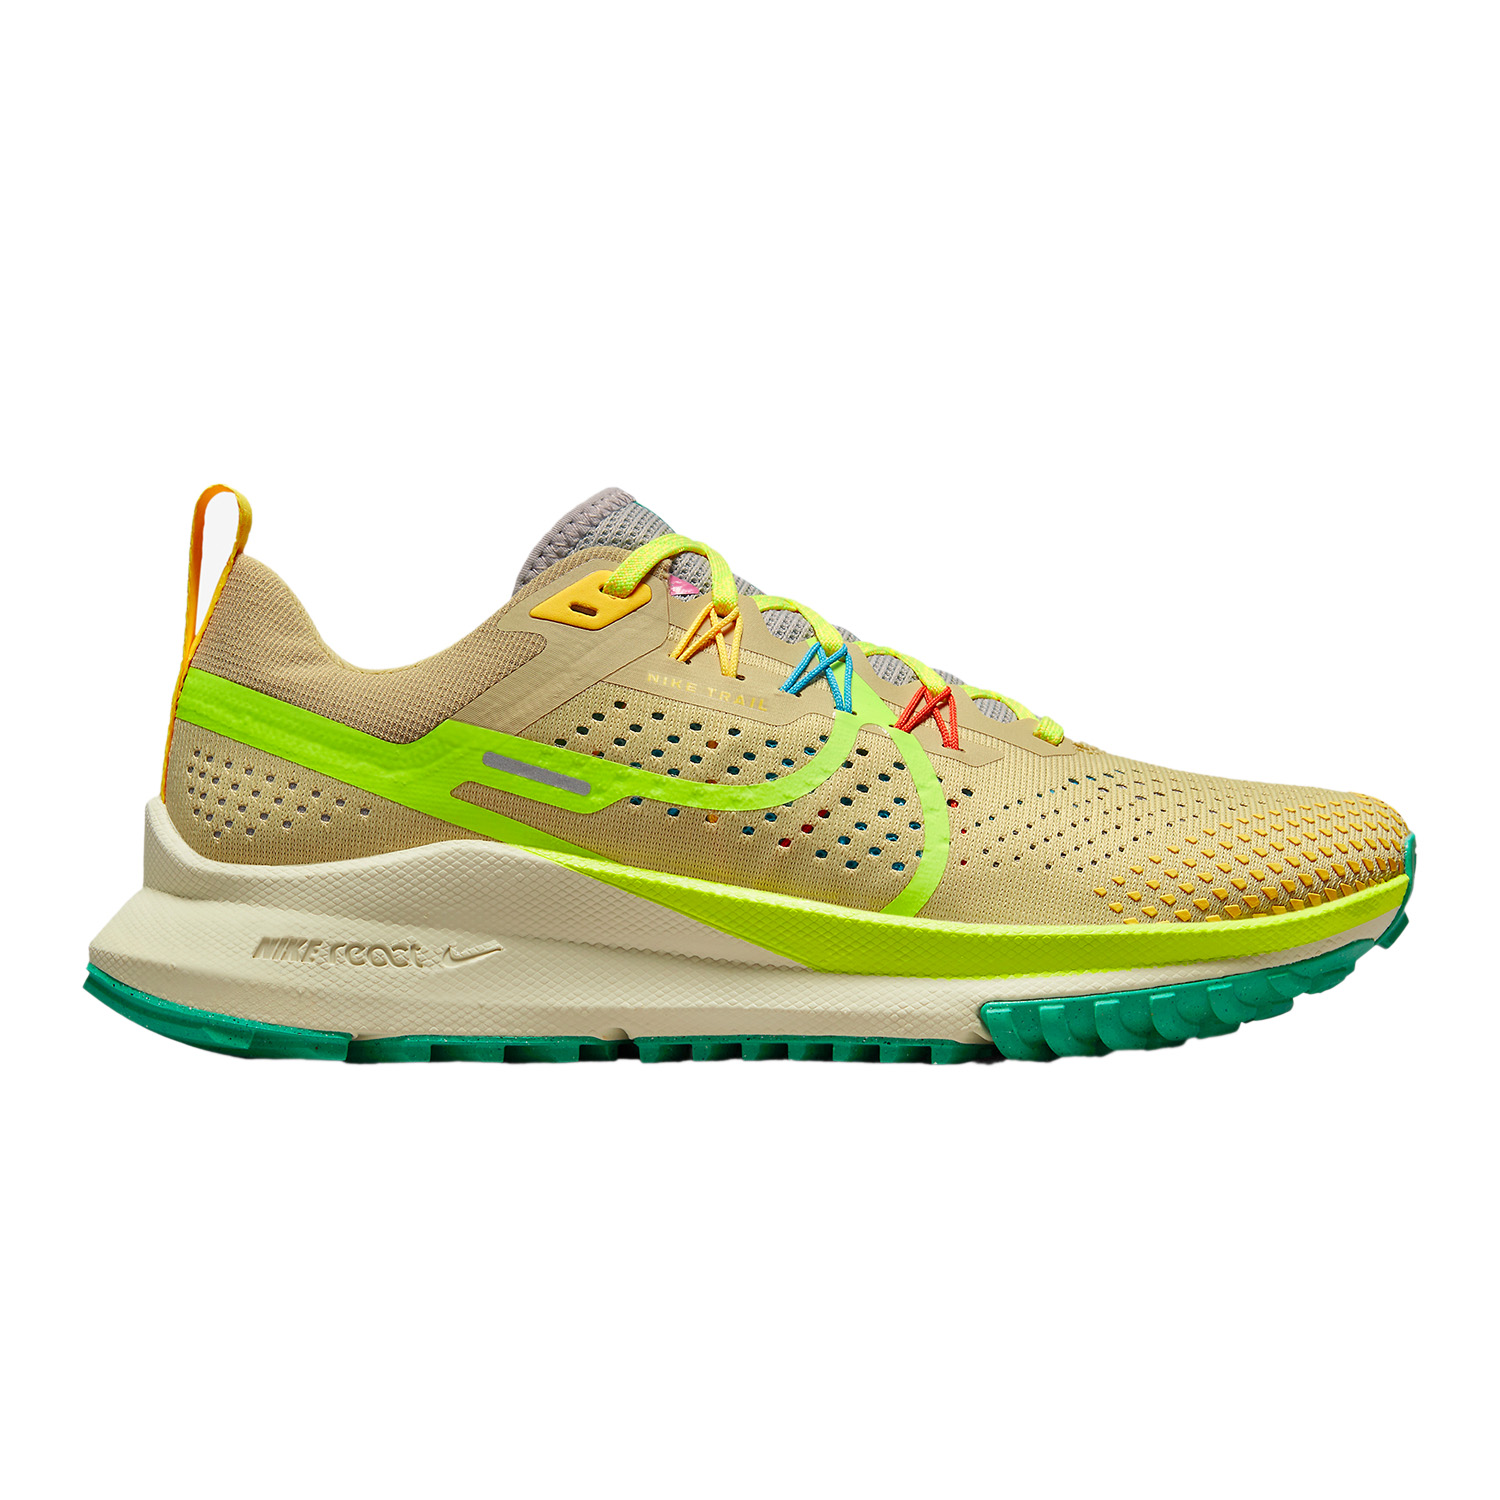 Nike Trail 4 Women's Shoes Team Gold